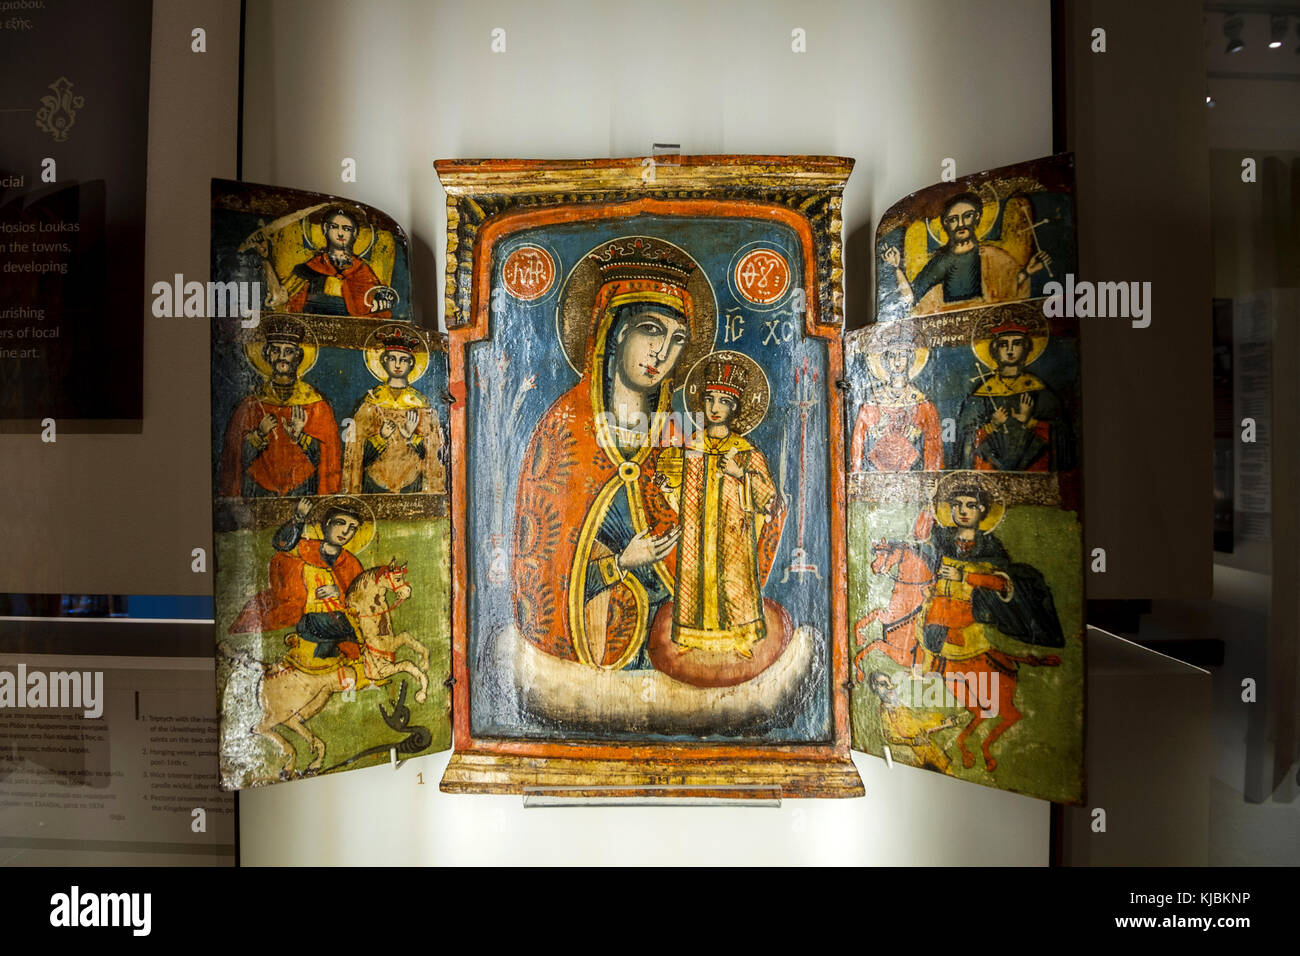 Wooden triptych with representation of christian orthodox religious scenes. In the middle there is Holy Mary holding newborn Jesus Christ. Stock Photo